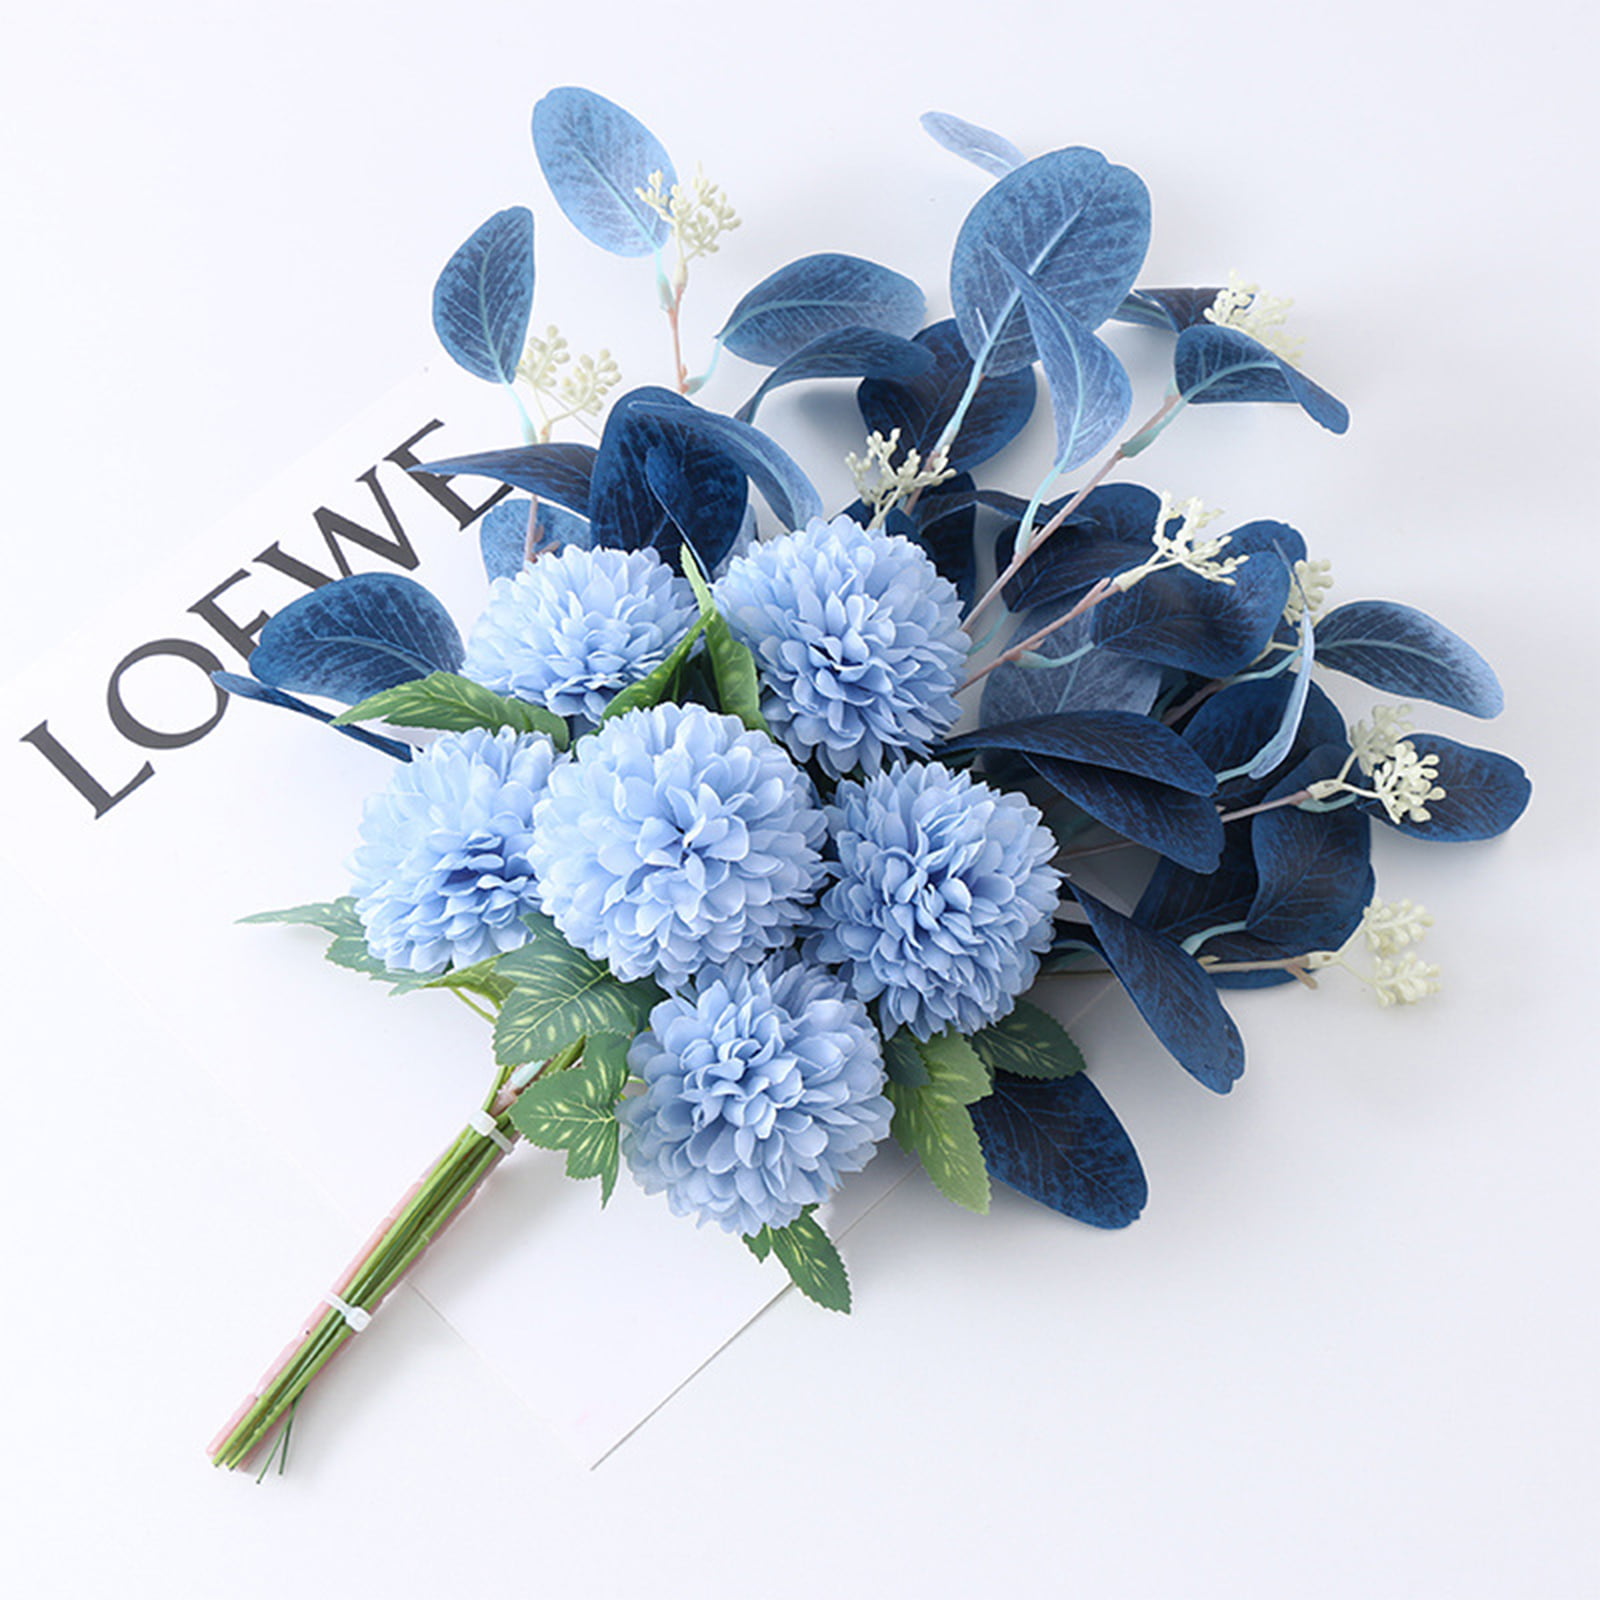 Hydrangea Bridal Bouquet Tutorial - Professional Finishing Products